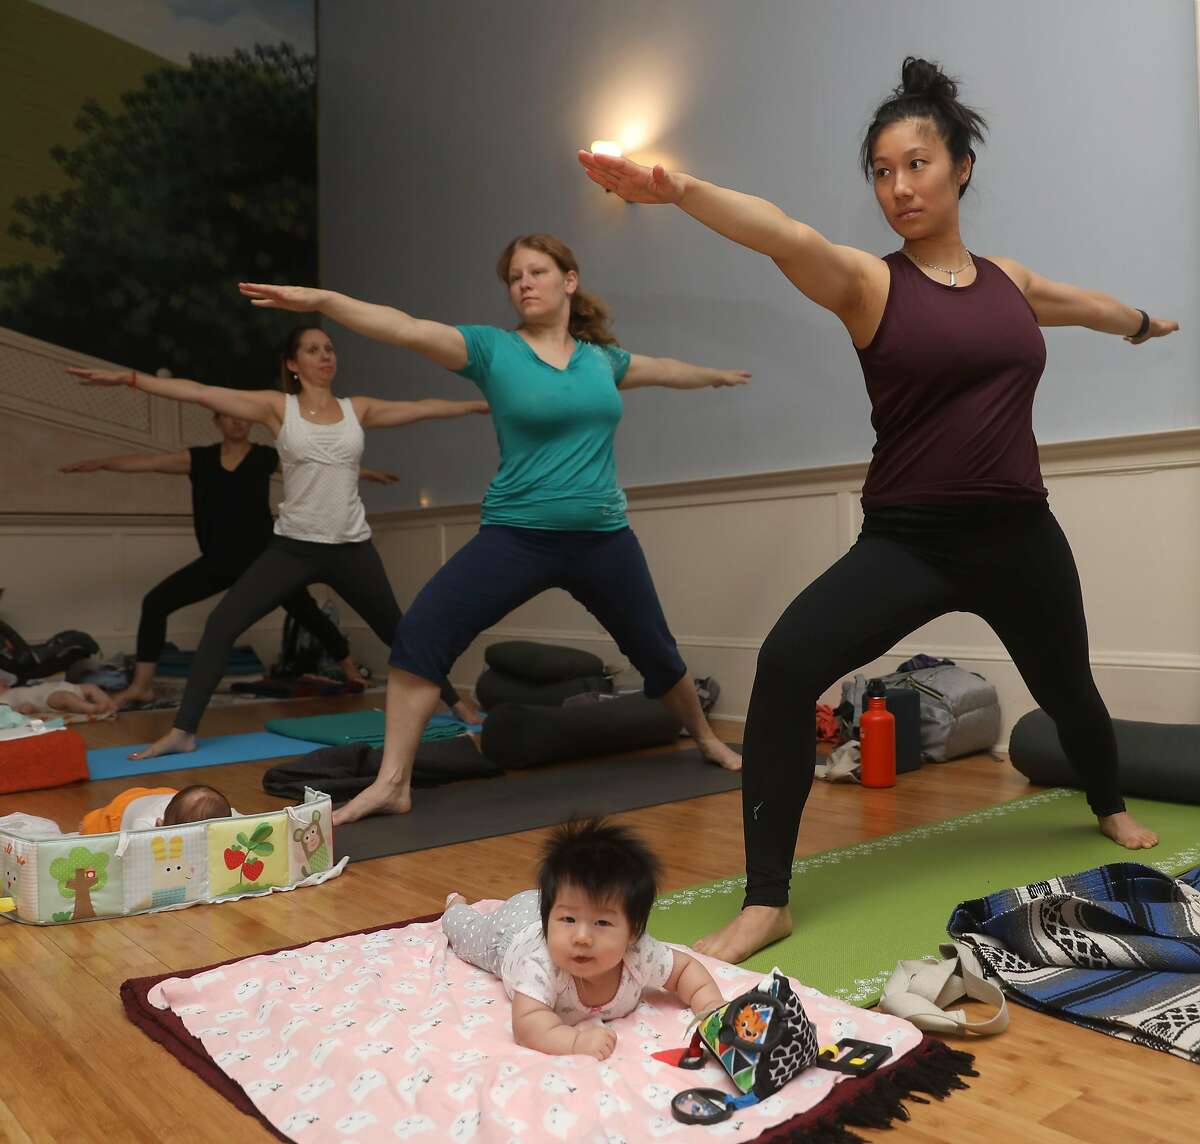 Emma (left), 12 weeks old, takes mom and baby yoga class with her mom Amanda Chau from San Francisco,at Yoga Tree on Friday, Sept. 6, 2019 in San Francisco, Calif.